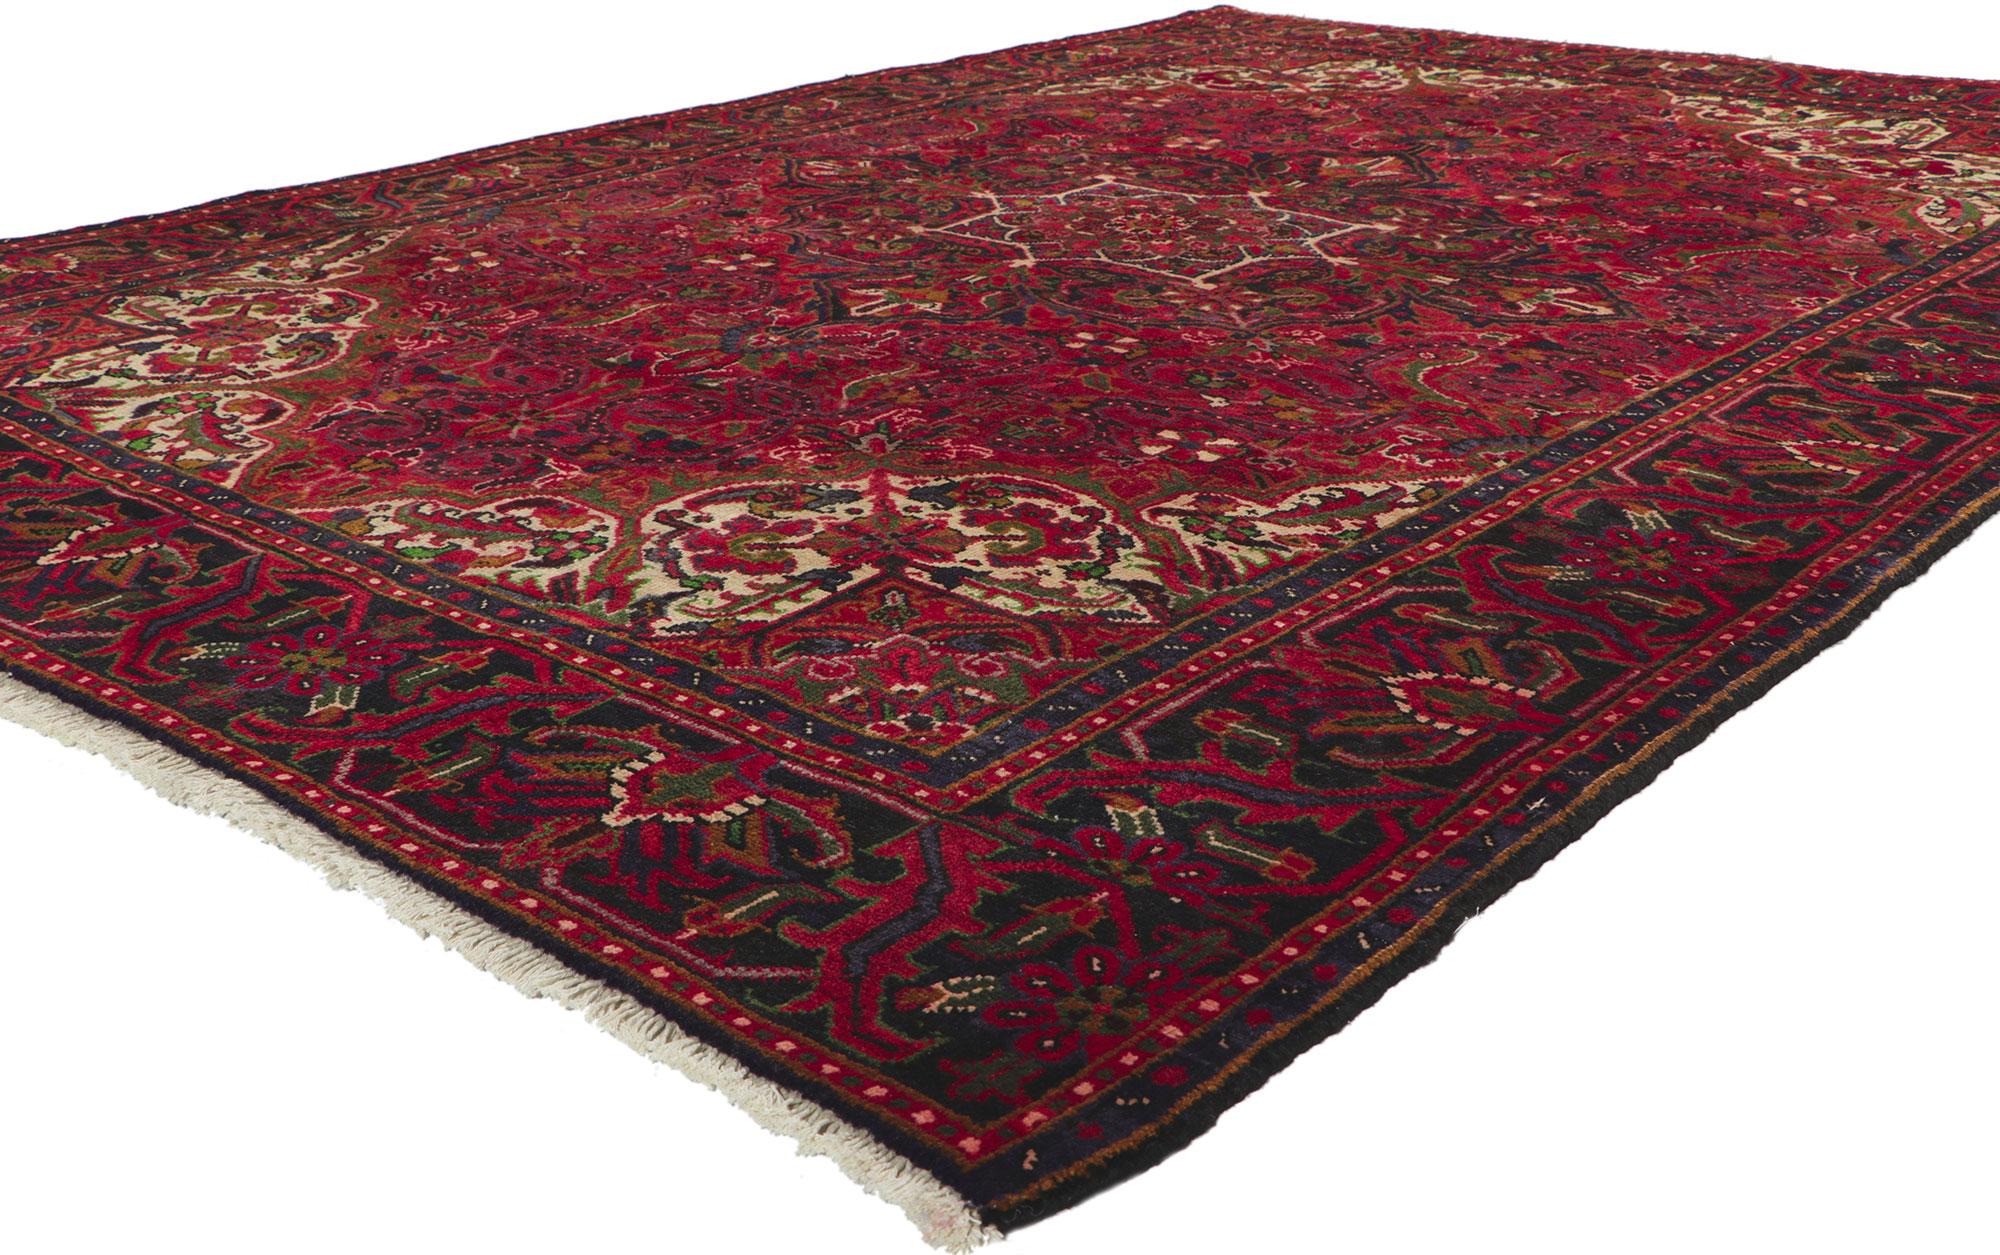 61042 Vintage Persian Heriz Rug 06'09 x 09'04.
Warm and inviting with timeless style, this hand-knotted wool vintage Persian Heriz rug is a captivating vision of woven beauty. The composition features an concentric lozenge and octofoil medallion